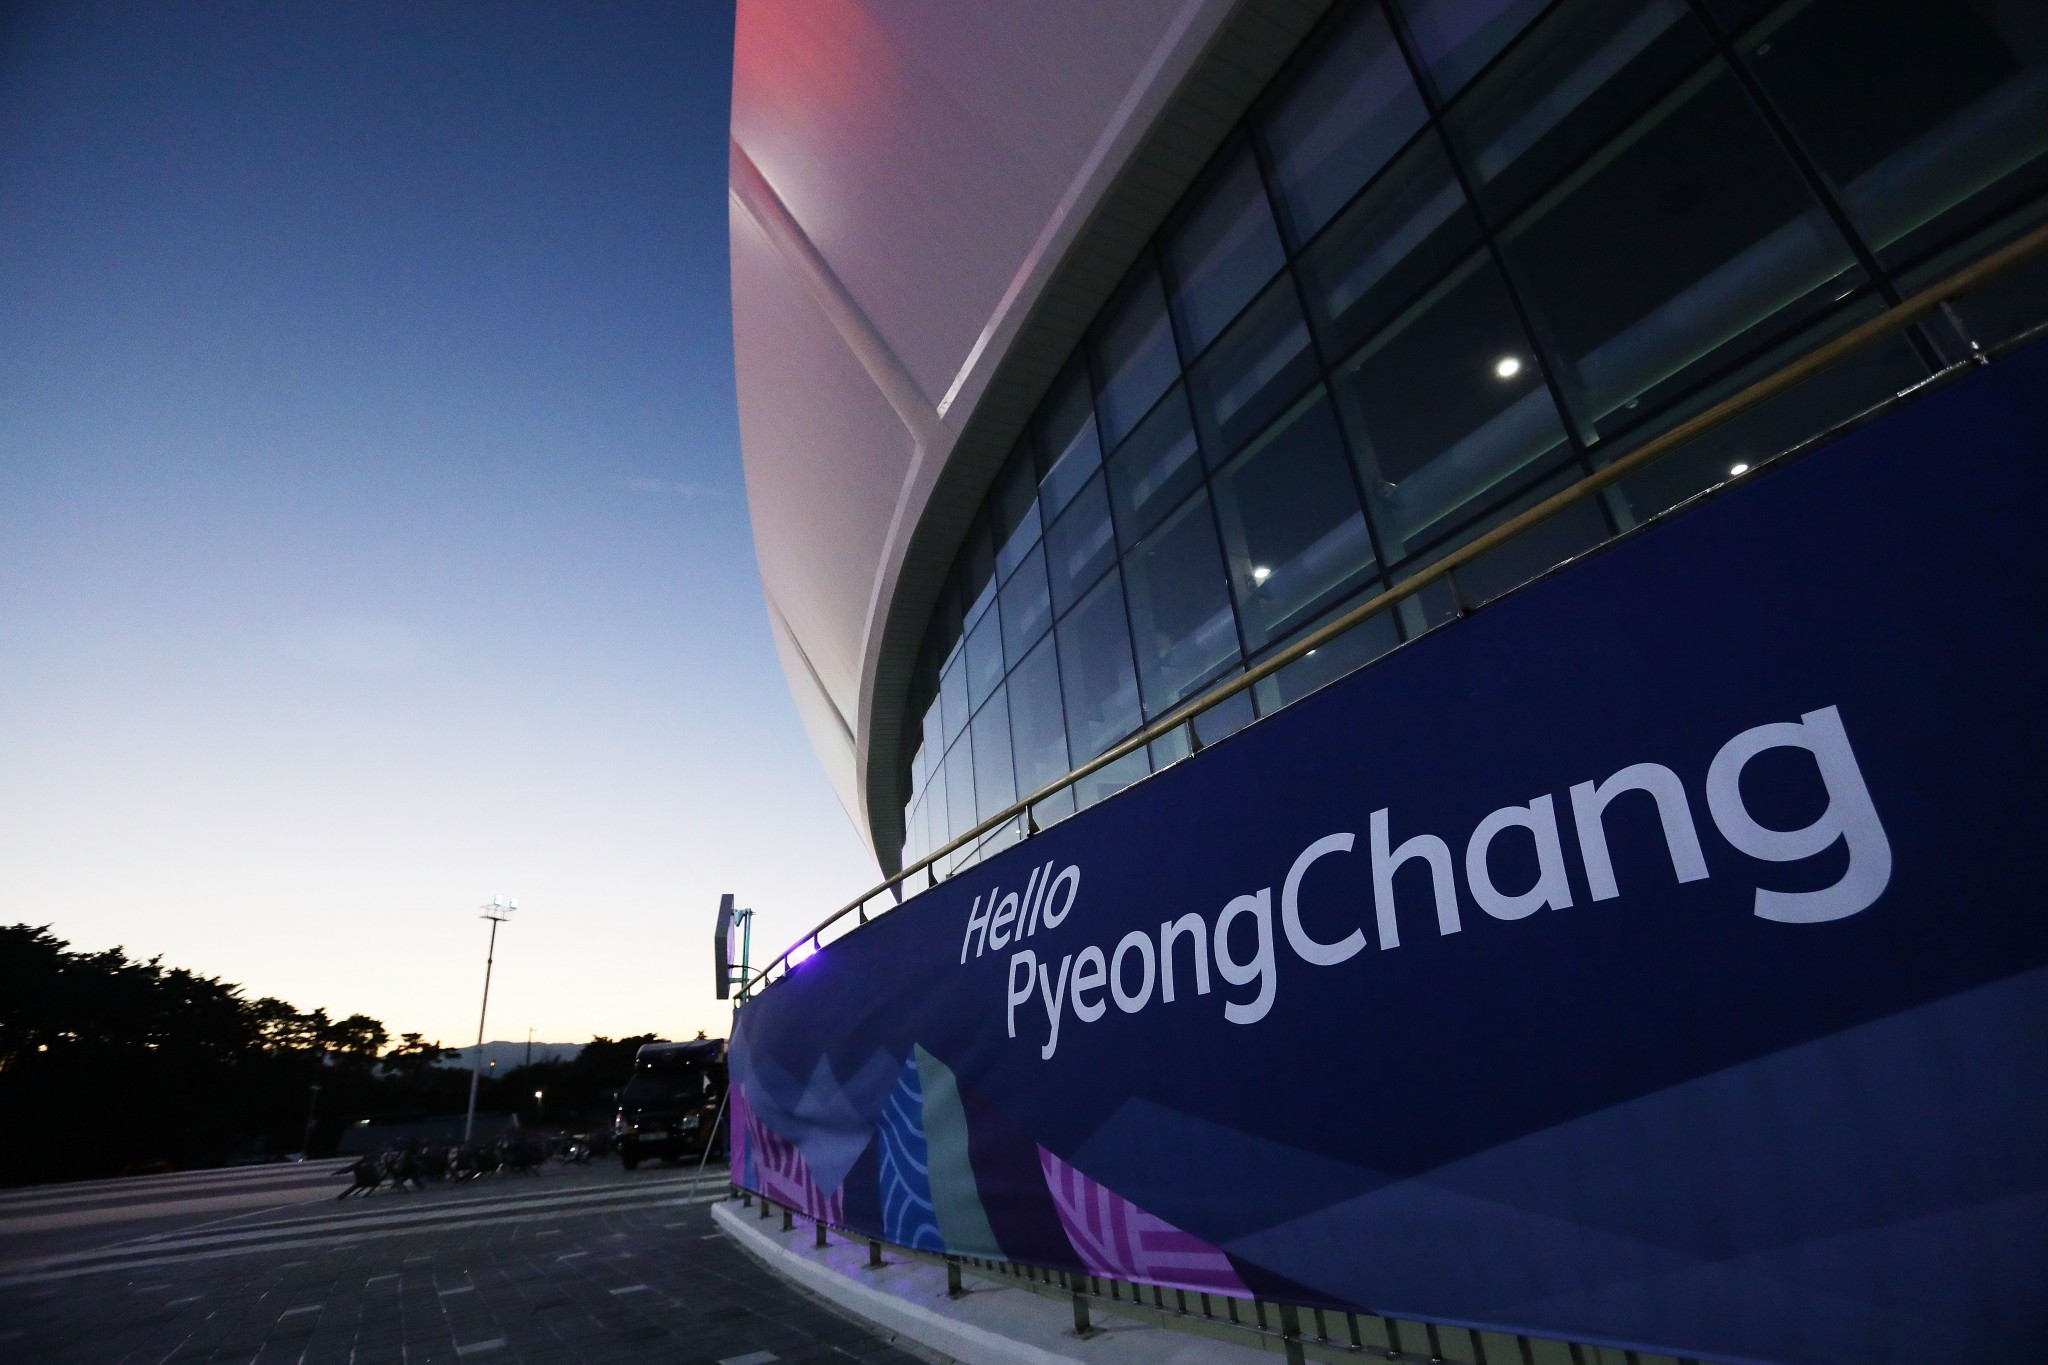 The build-up to Pyeongchang 2018 comes amid heightened tentions in the Korean peninsula ©Getty Images